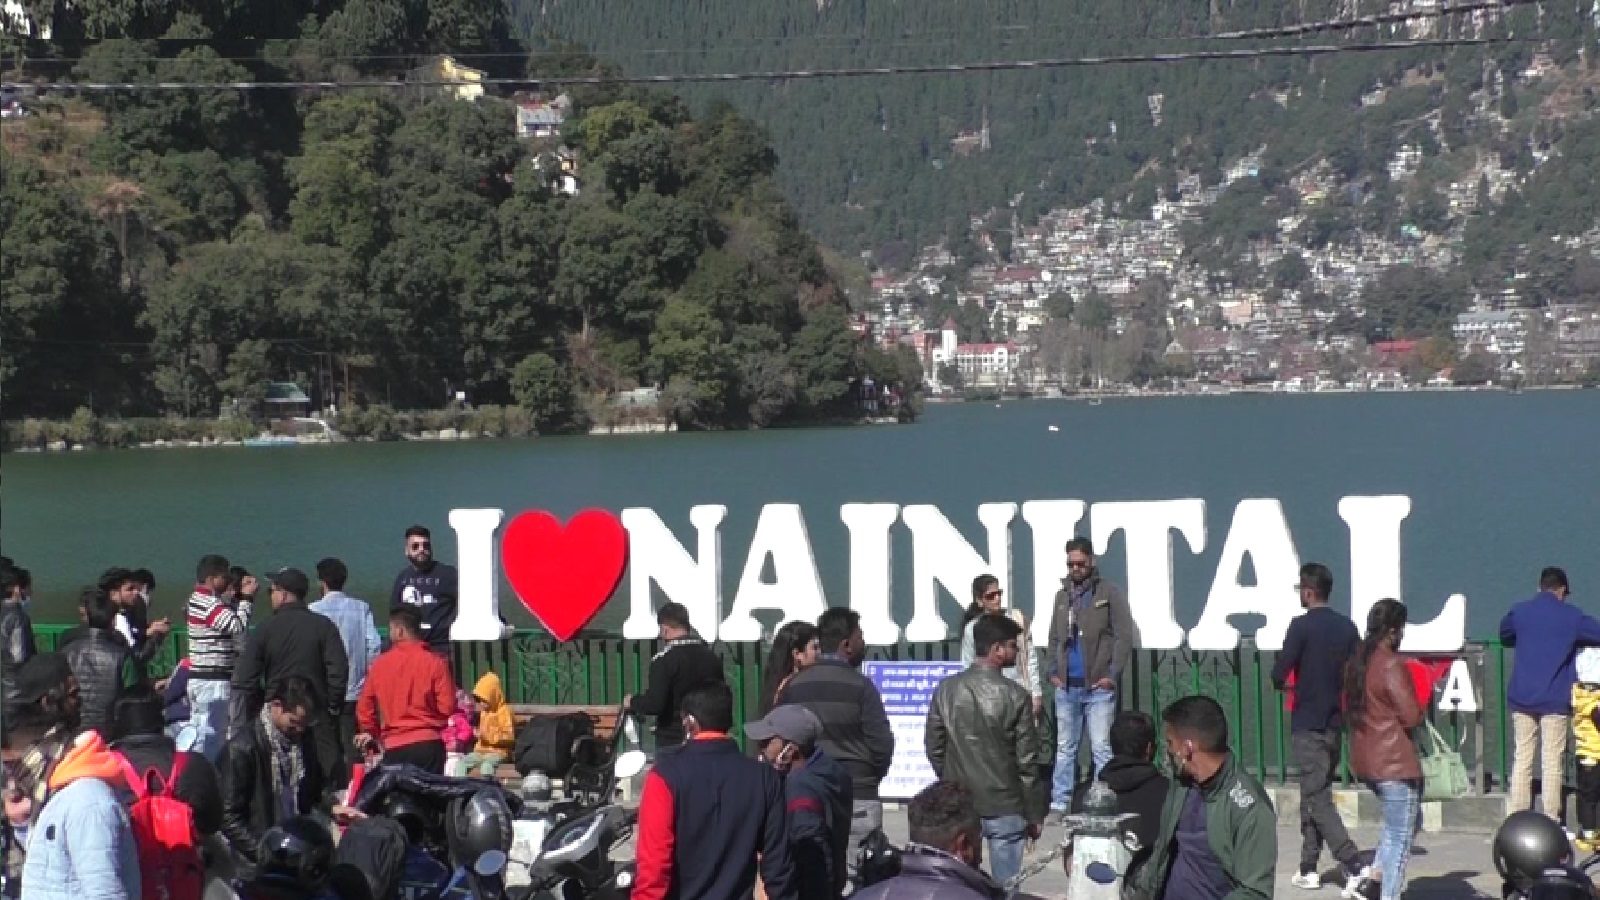 Uttarakhand Assembly Elections 2022 Nainital vidhan sabha seat profile Nainital assembly seat details - Nainital Assembly Seat: AAP will do wonders in Nainital?  Know everything about this assembly seat ...